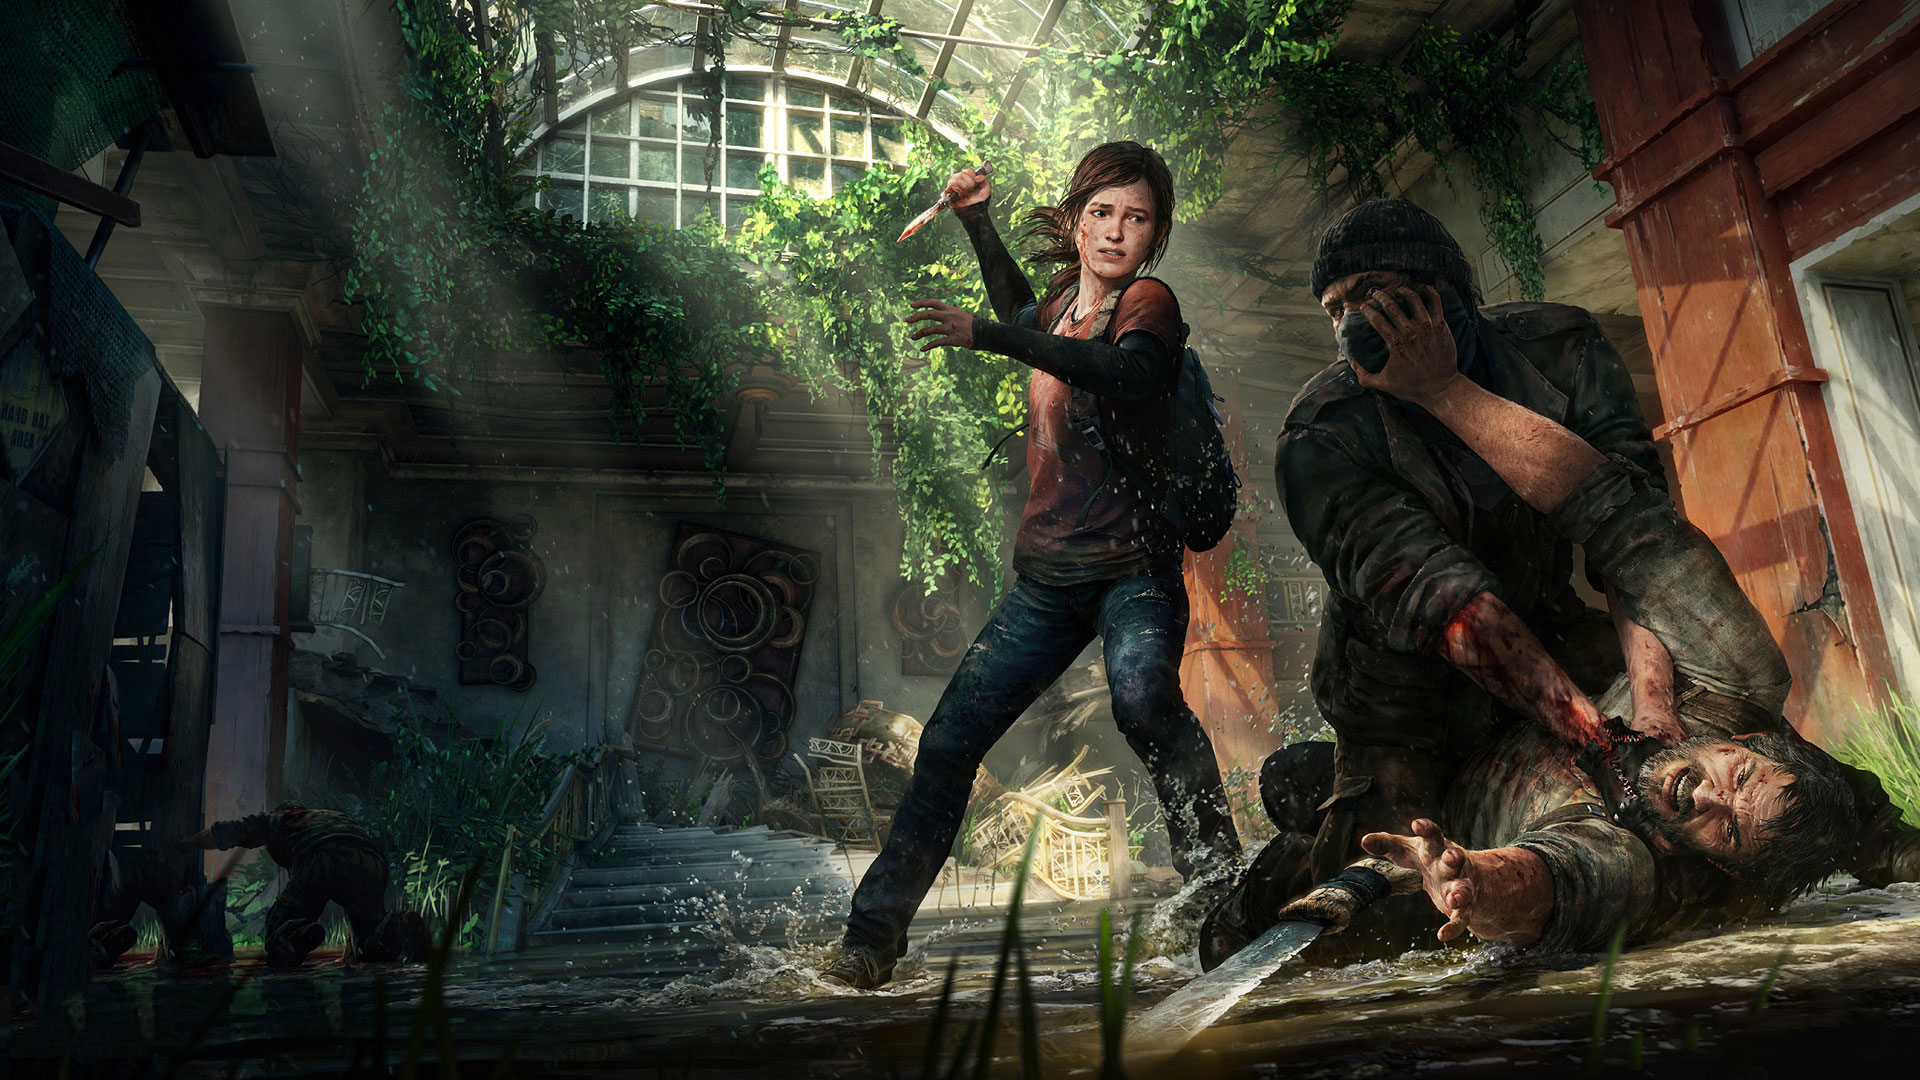 Best PS4 exclusive games - The Last of Us Remastered